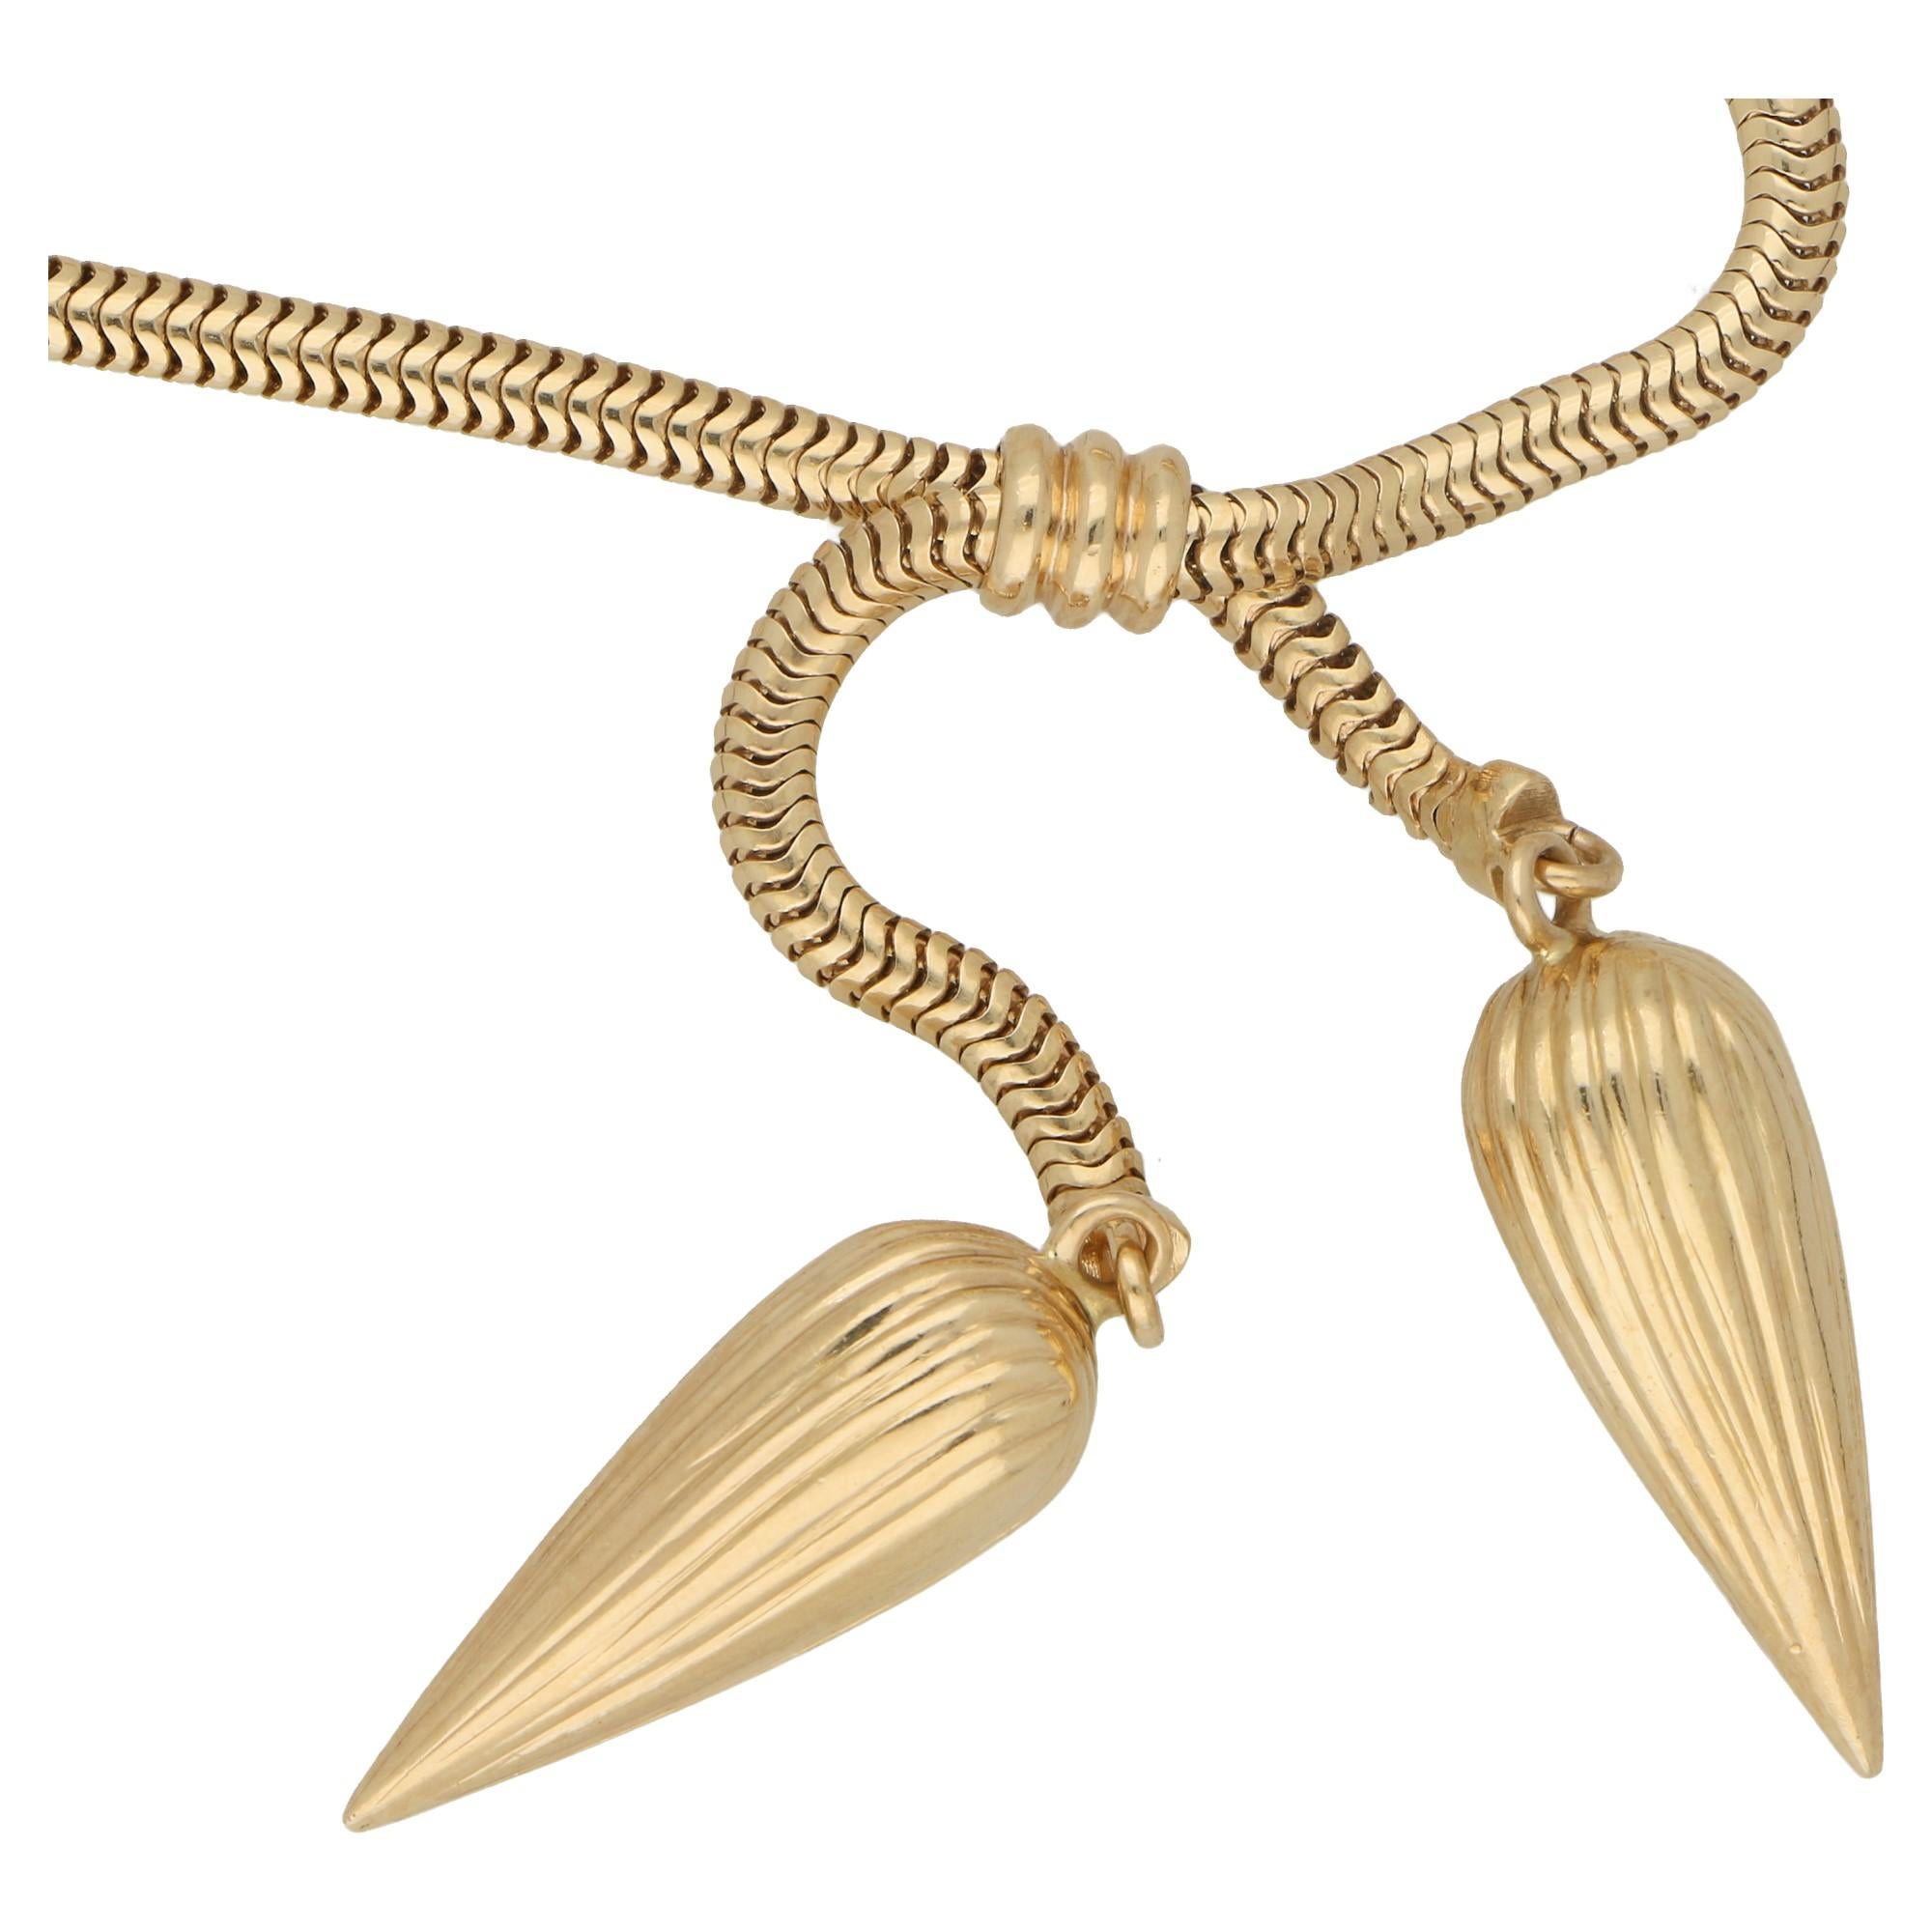 Extremely elegant and tactile 1940's necklace made in 14 carat yellow gold. Tubular link with detailed upside down pear shaped drops. The necklace can be shortened or lengthened by sliding one end up the necklace. The necklace is secured by a